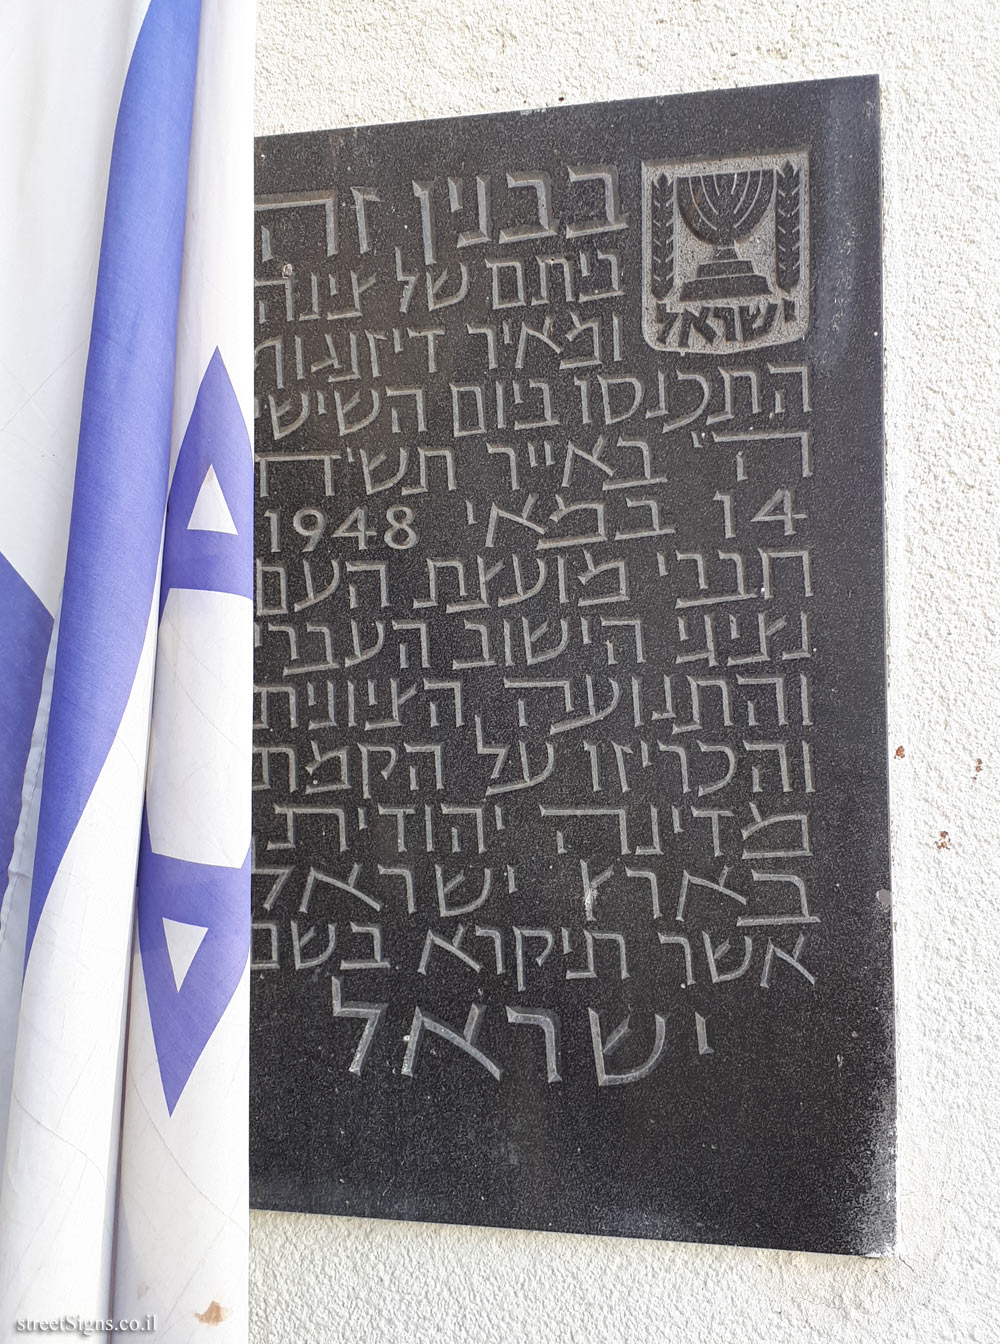 Tel Aviv - Independence Hall - The declaration of the establishment of the State of Israel